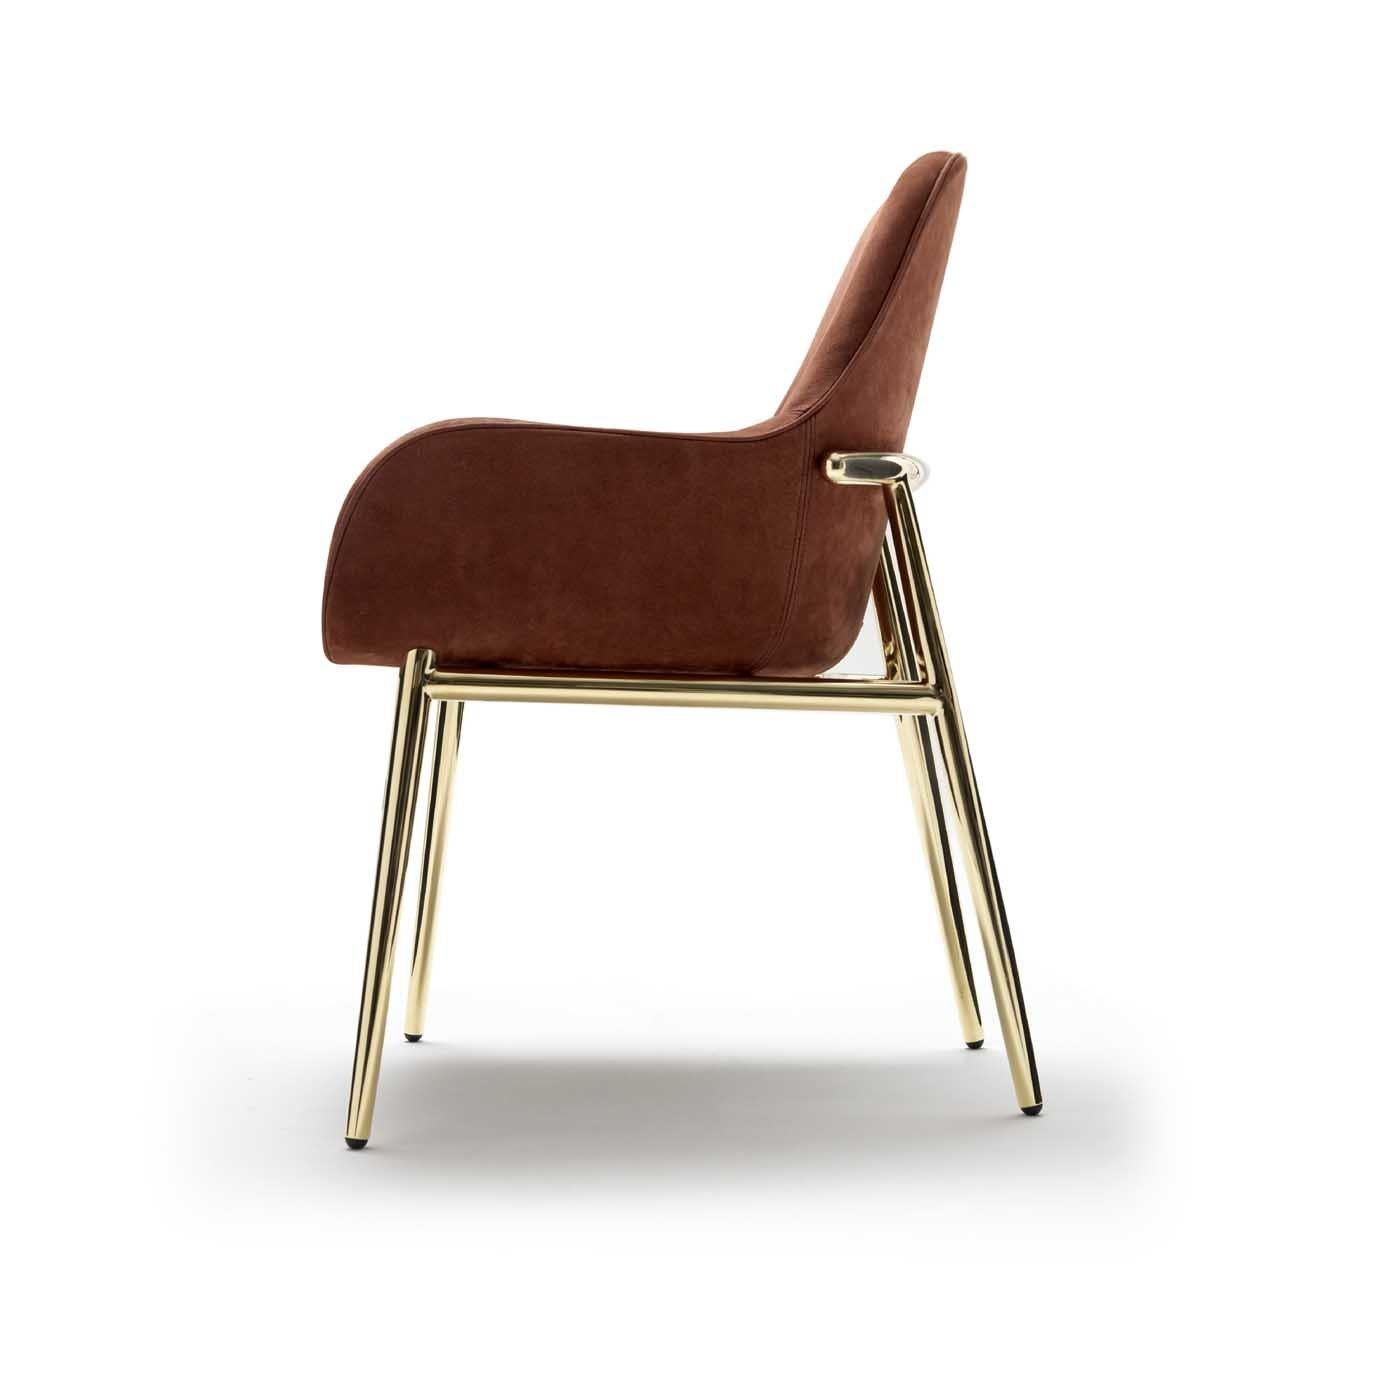 This exquisite chair with armrests will make a superb accent either alone or next to a modern desk. The metal structure boasts a polished gold finish and is inspired by the charm of mid-century style. It features four slanted legs and a frame that